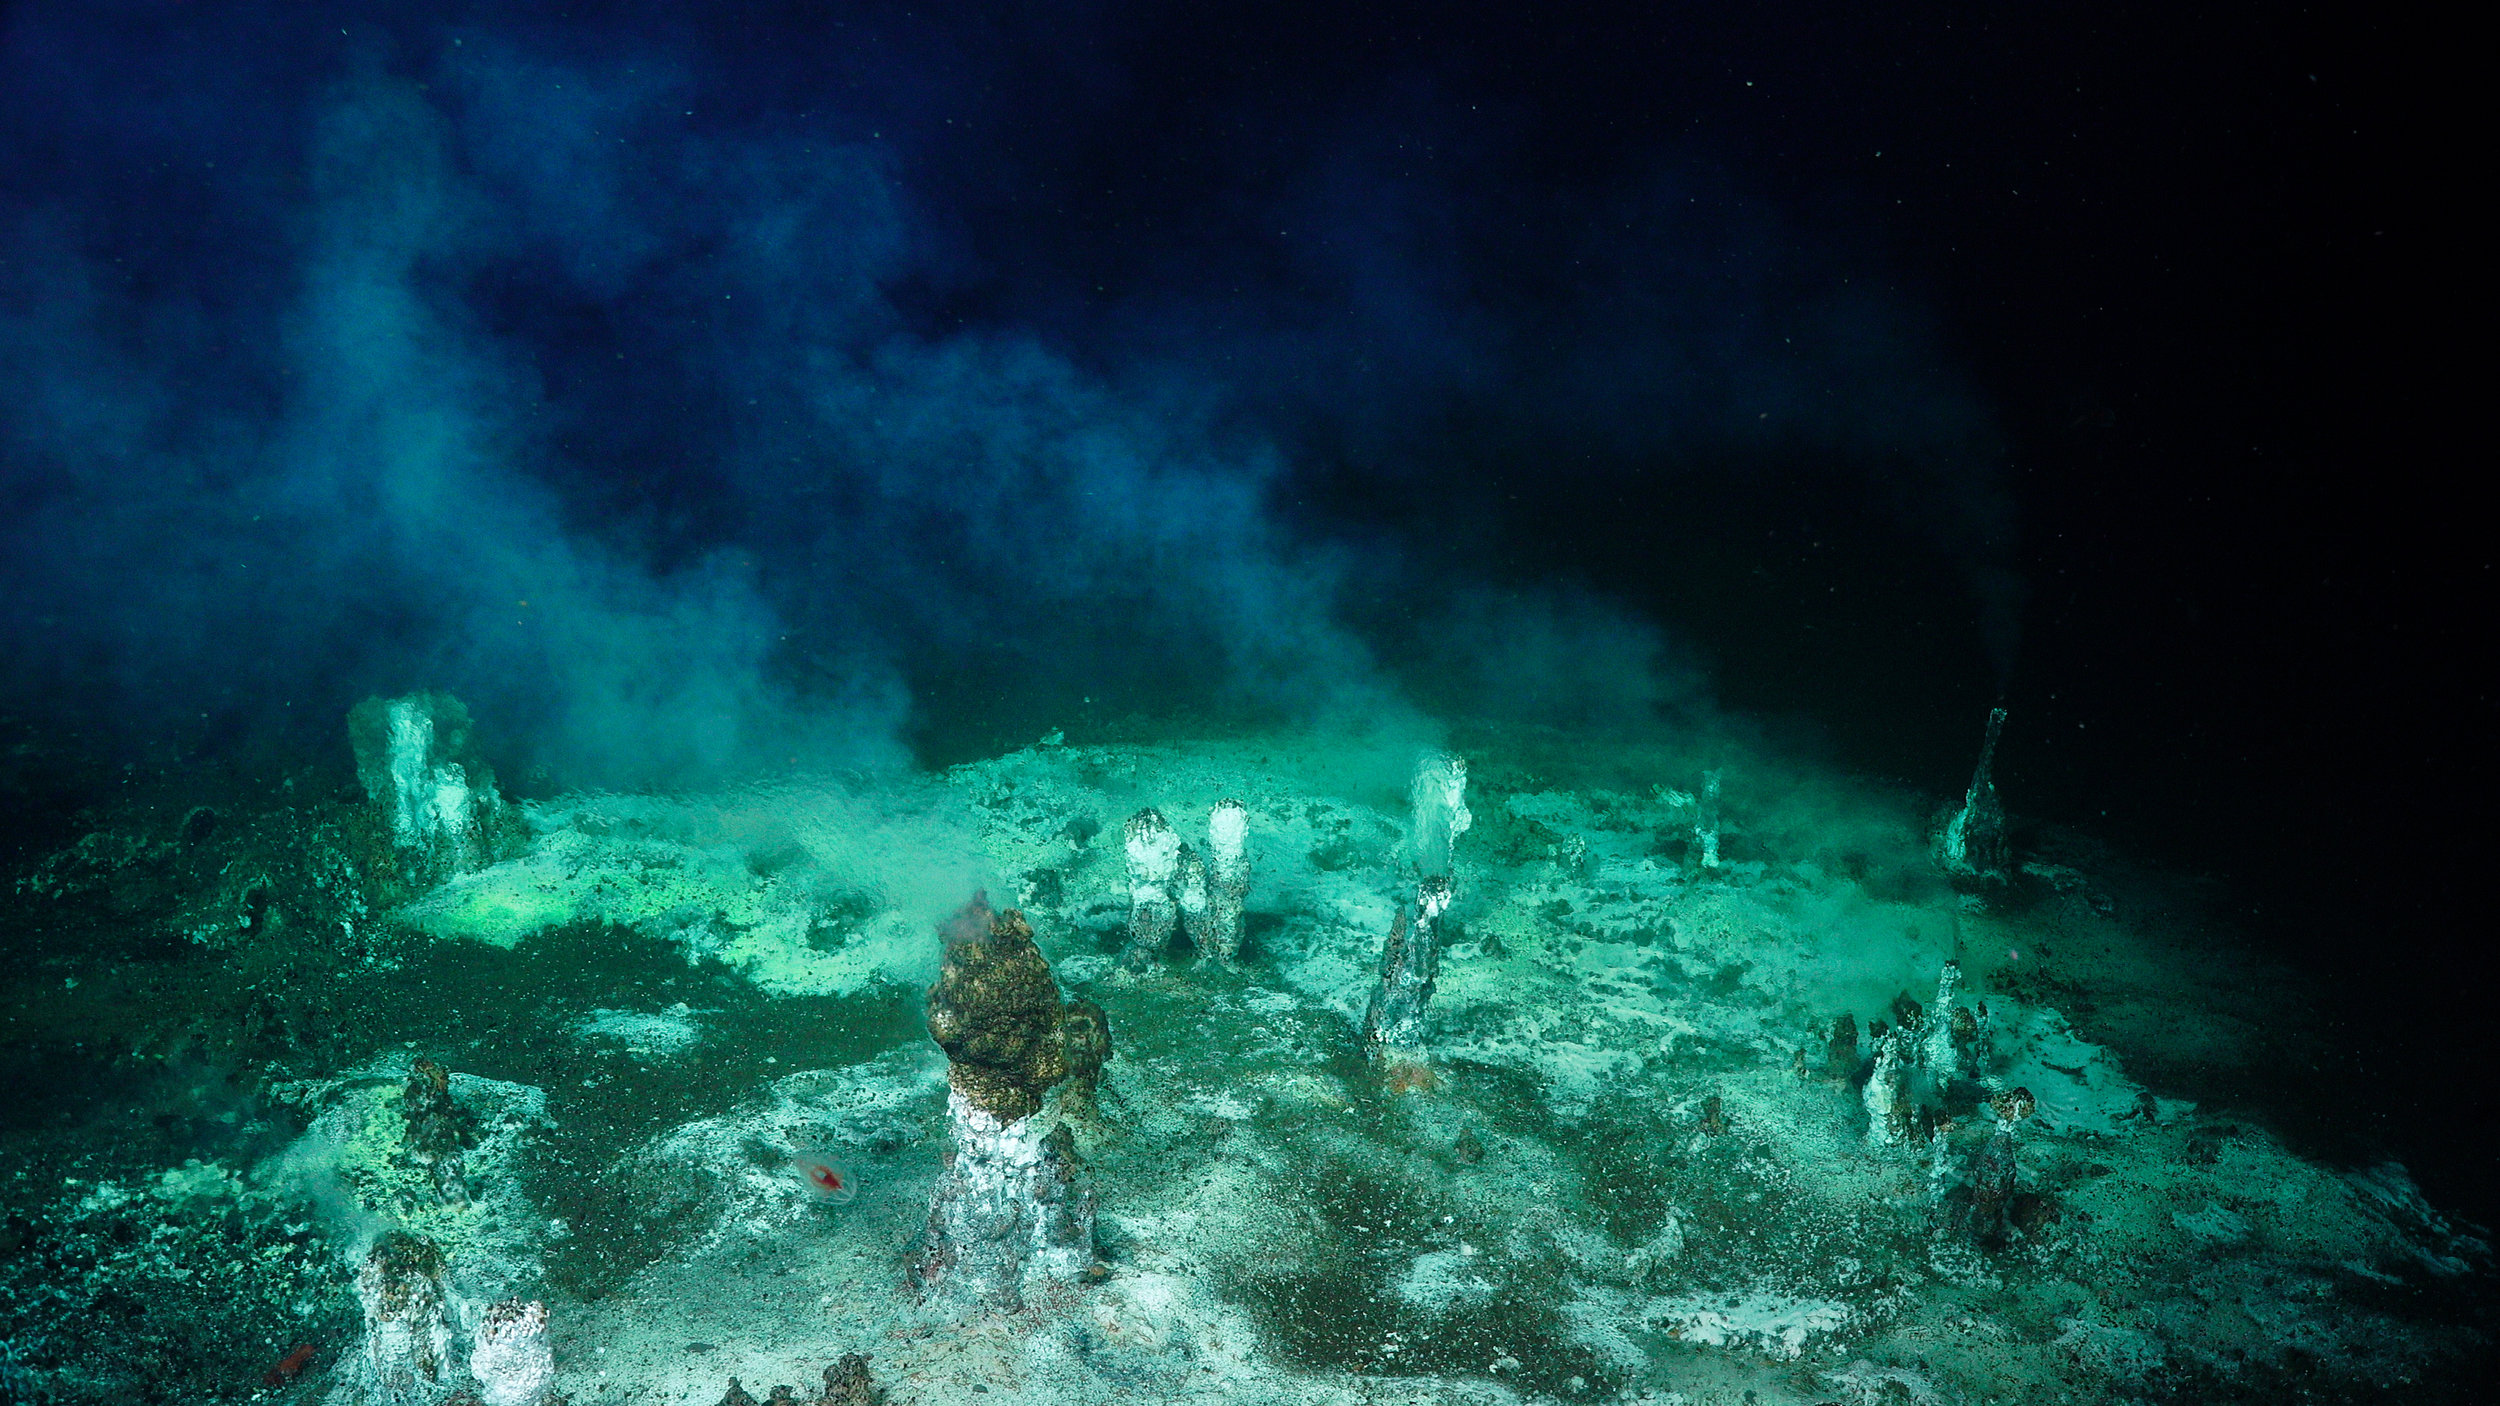 Bacterial mats and hydrothermal chimneys in the Gulf of California.  (Image courtesy of Schmidt Ocean Institute)